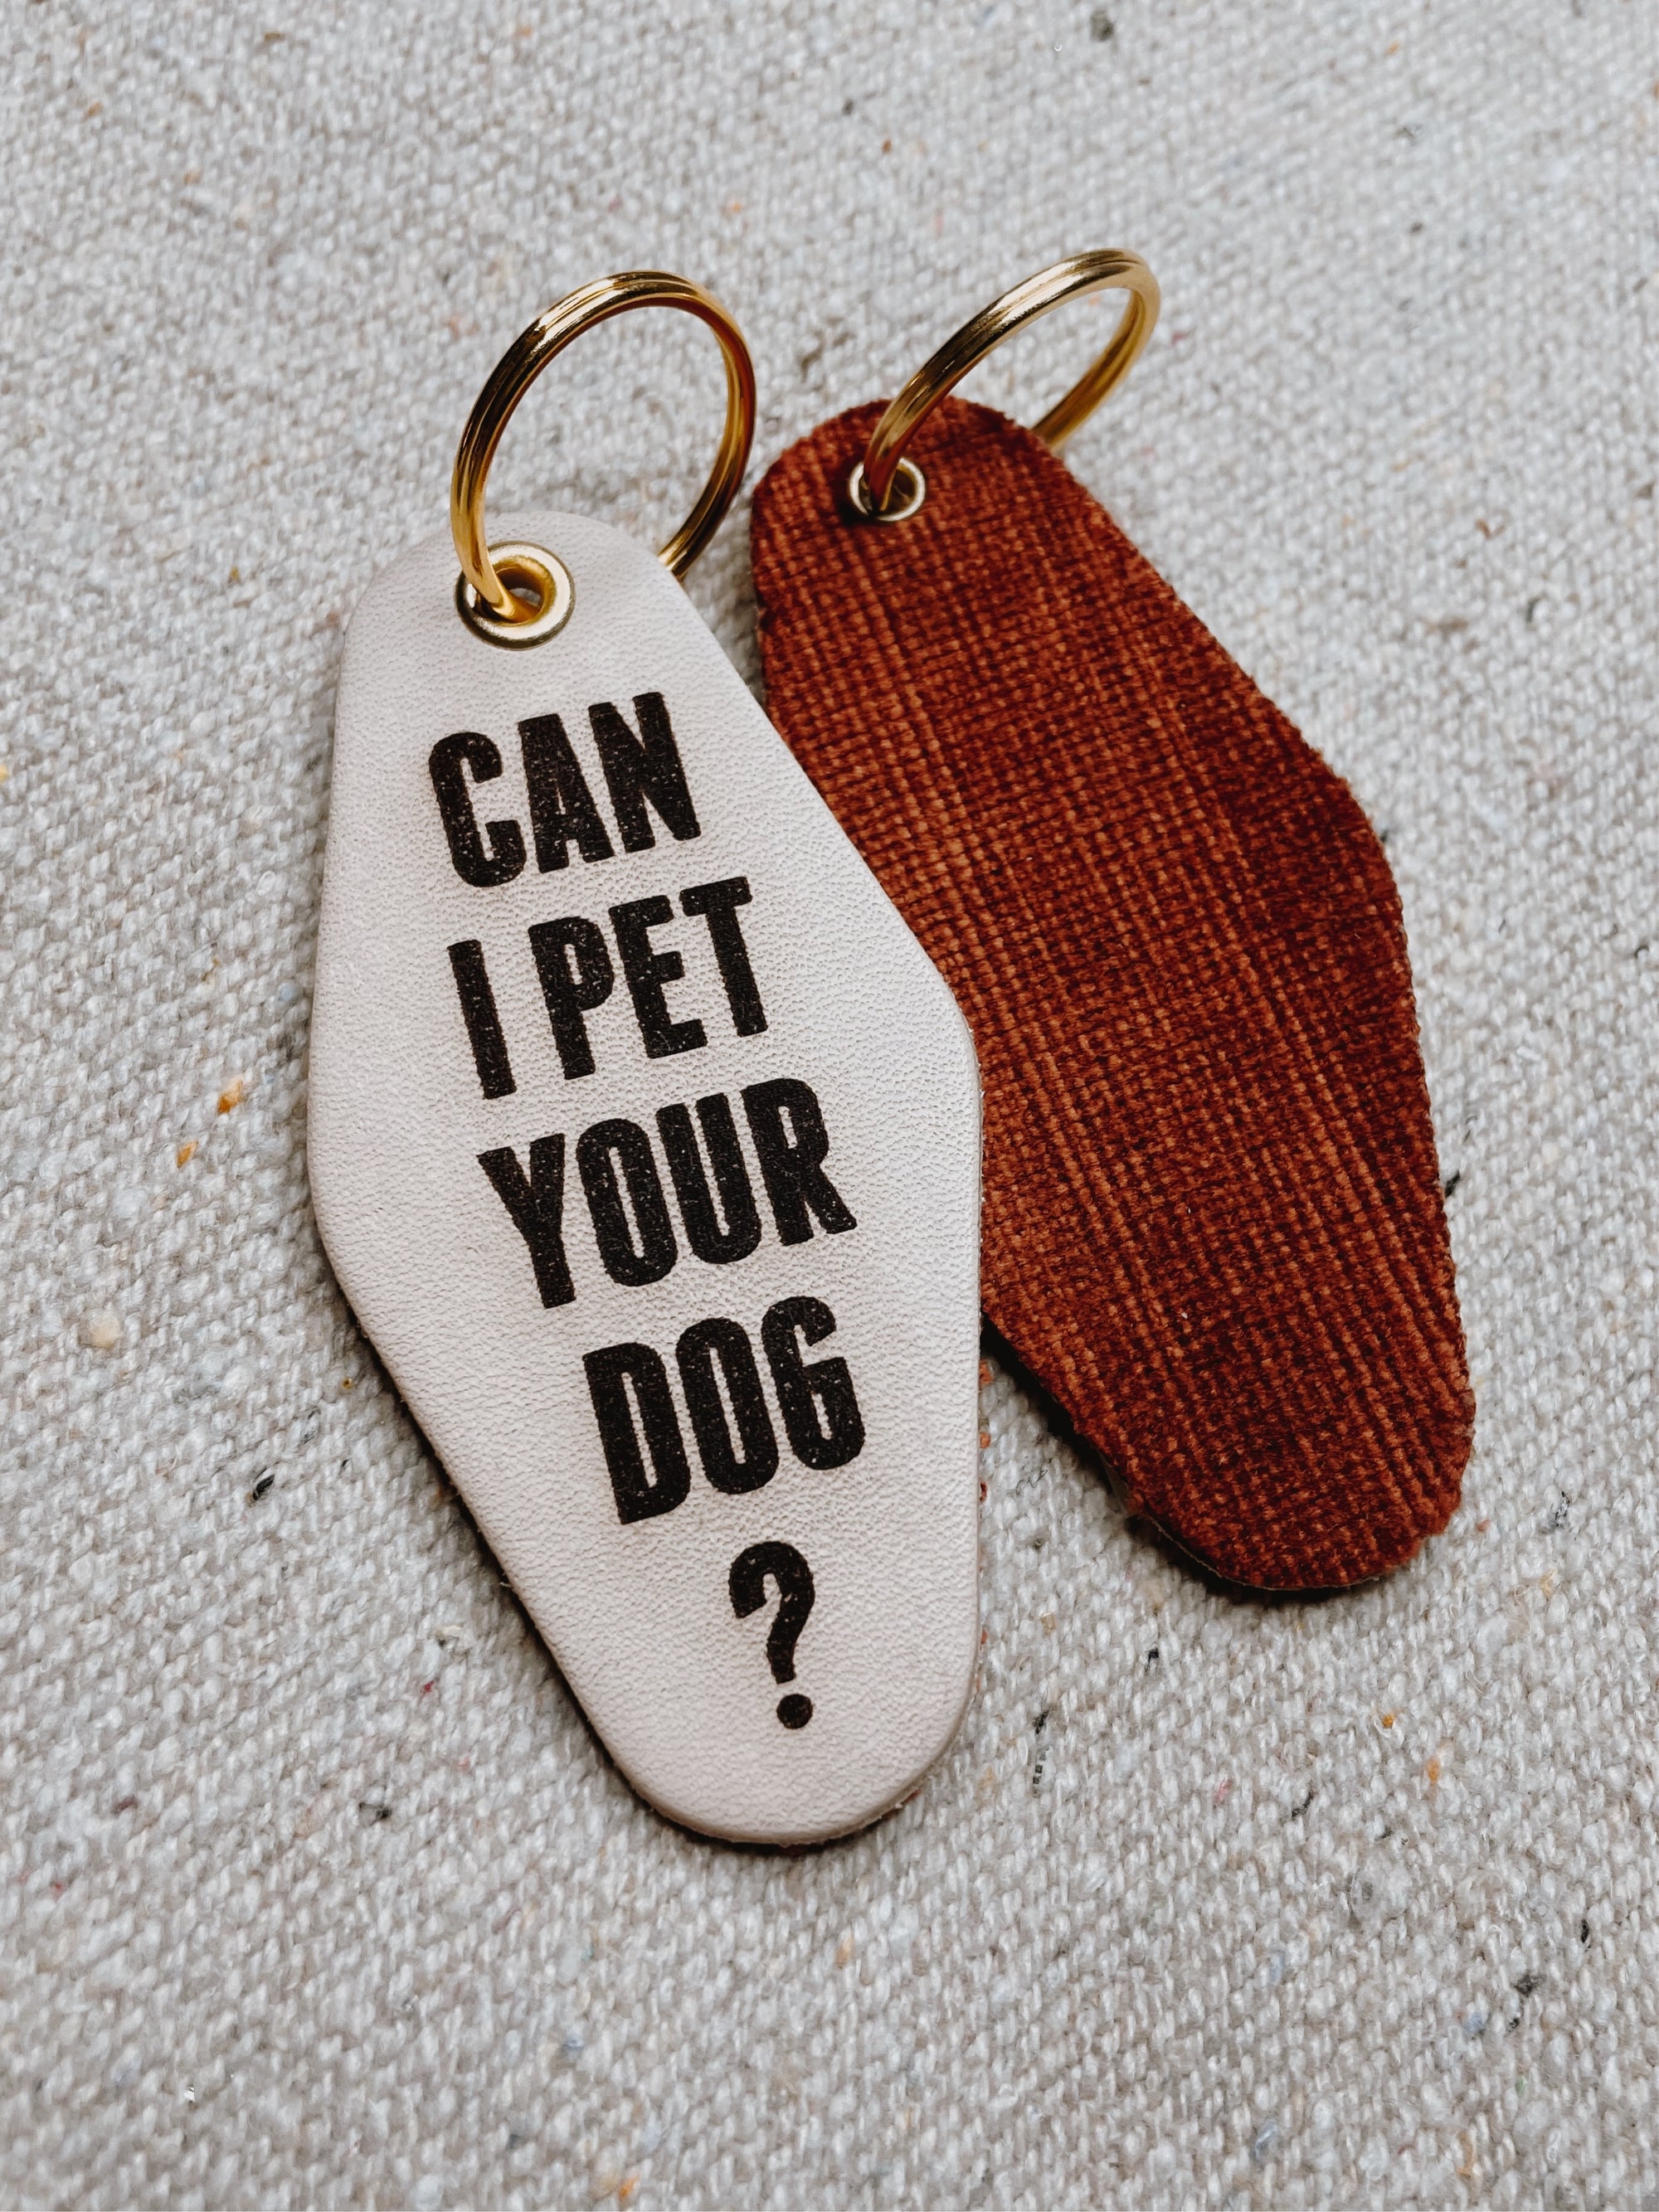 Can I Pet Your Dog? Keychain